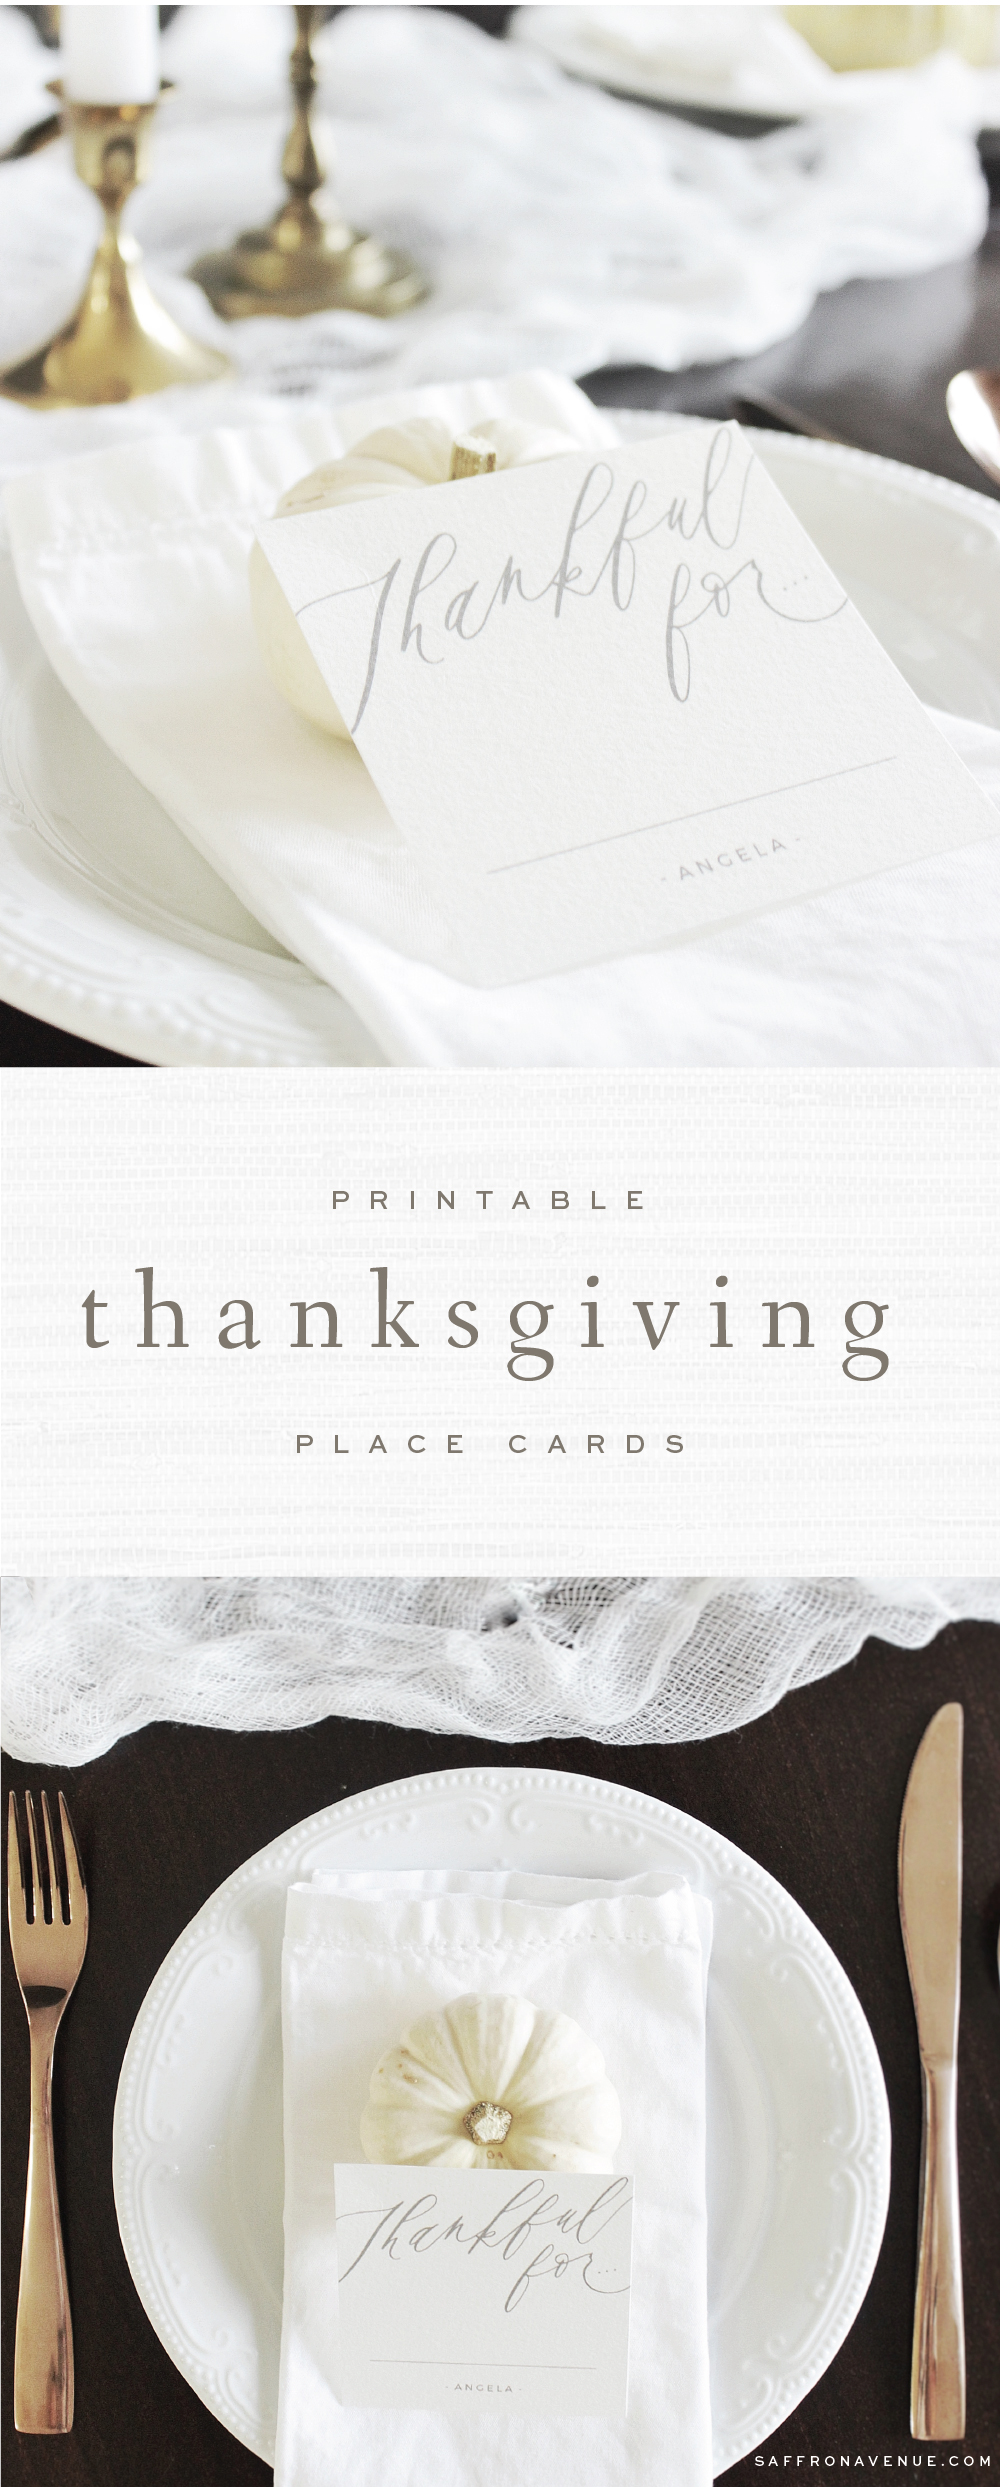 Natural and Chic Thanksgiving Inspiration